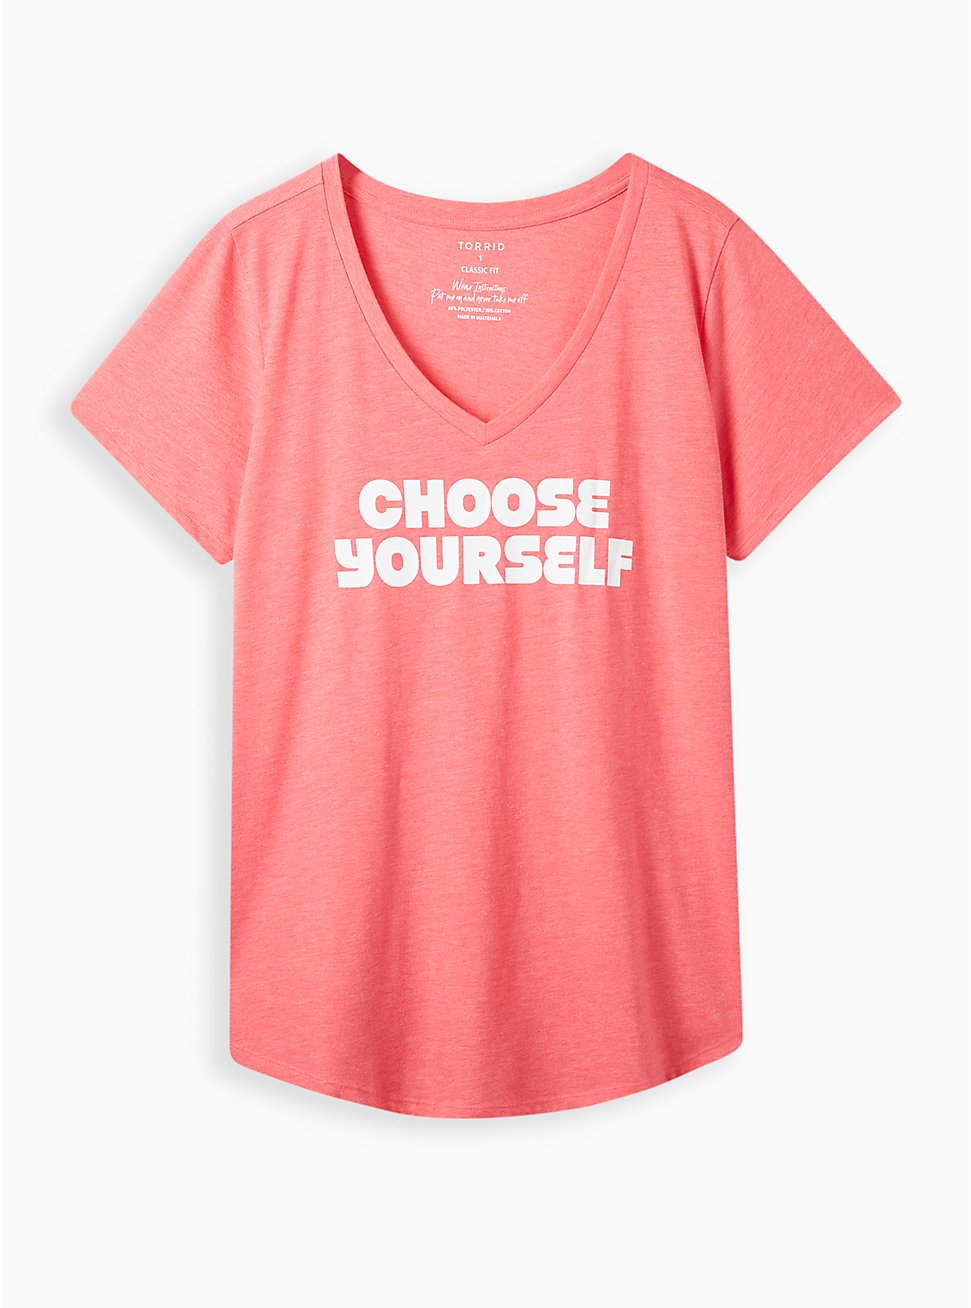 Girlfriend Tee - Signature Jersey Choose Yourself Heather Coral, RASPBERRY, hi-res